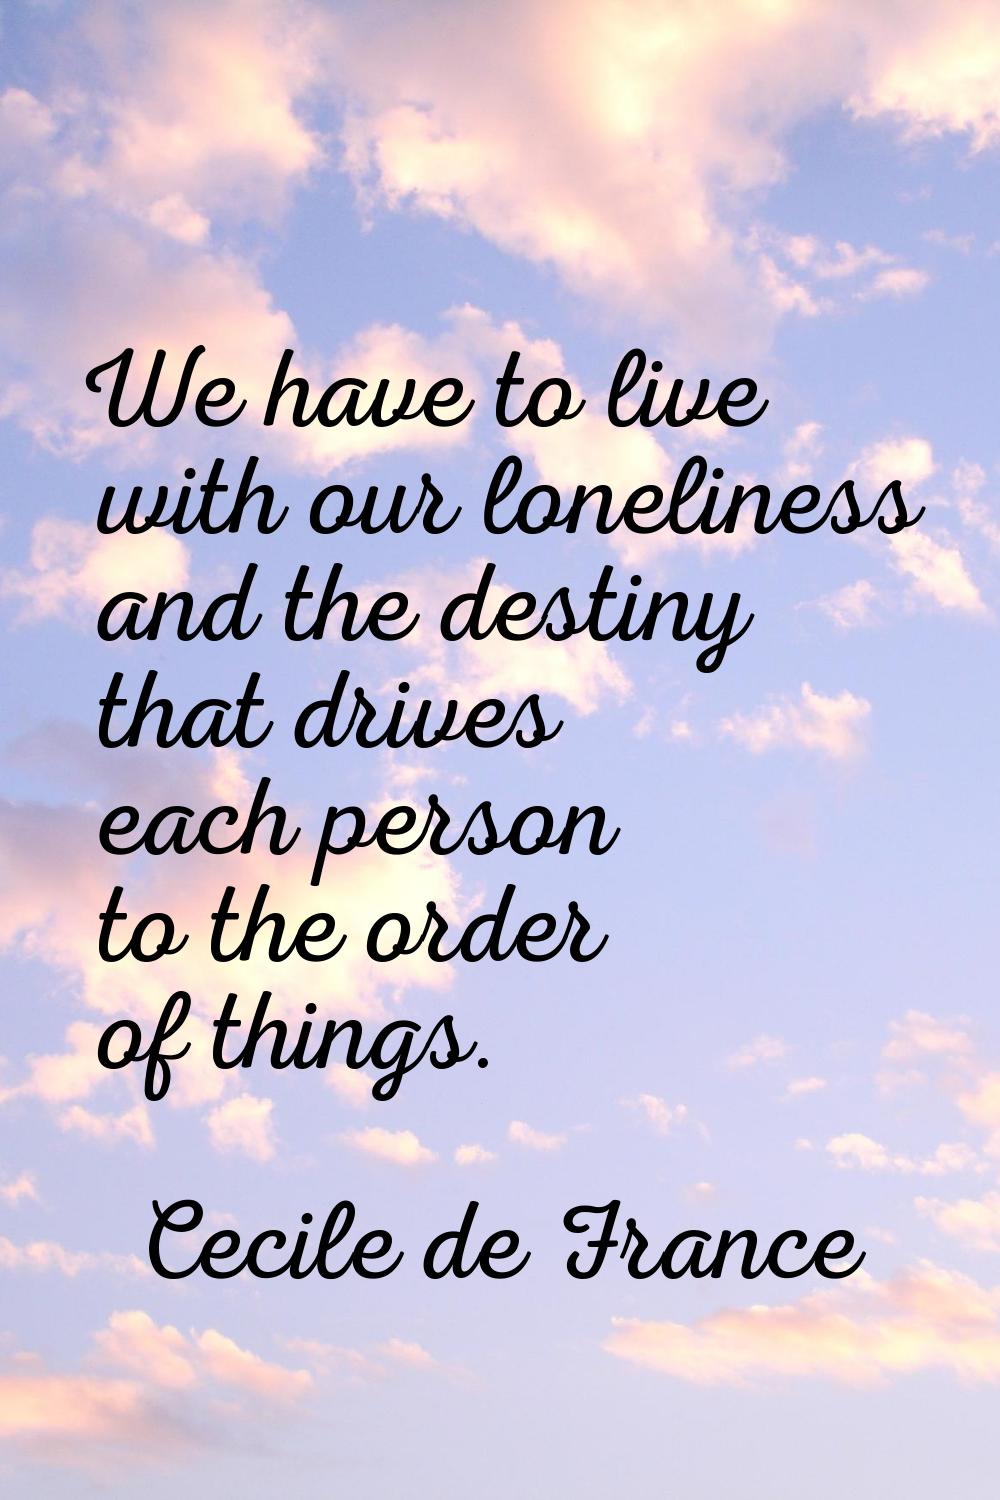 We have to live with our loneliness and the destiny that drives each person to the order of things.